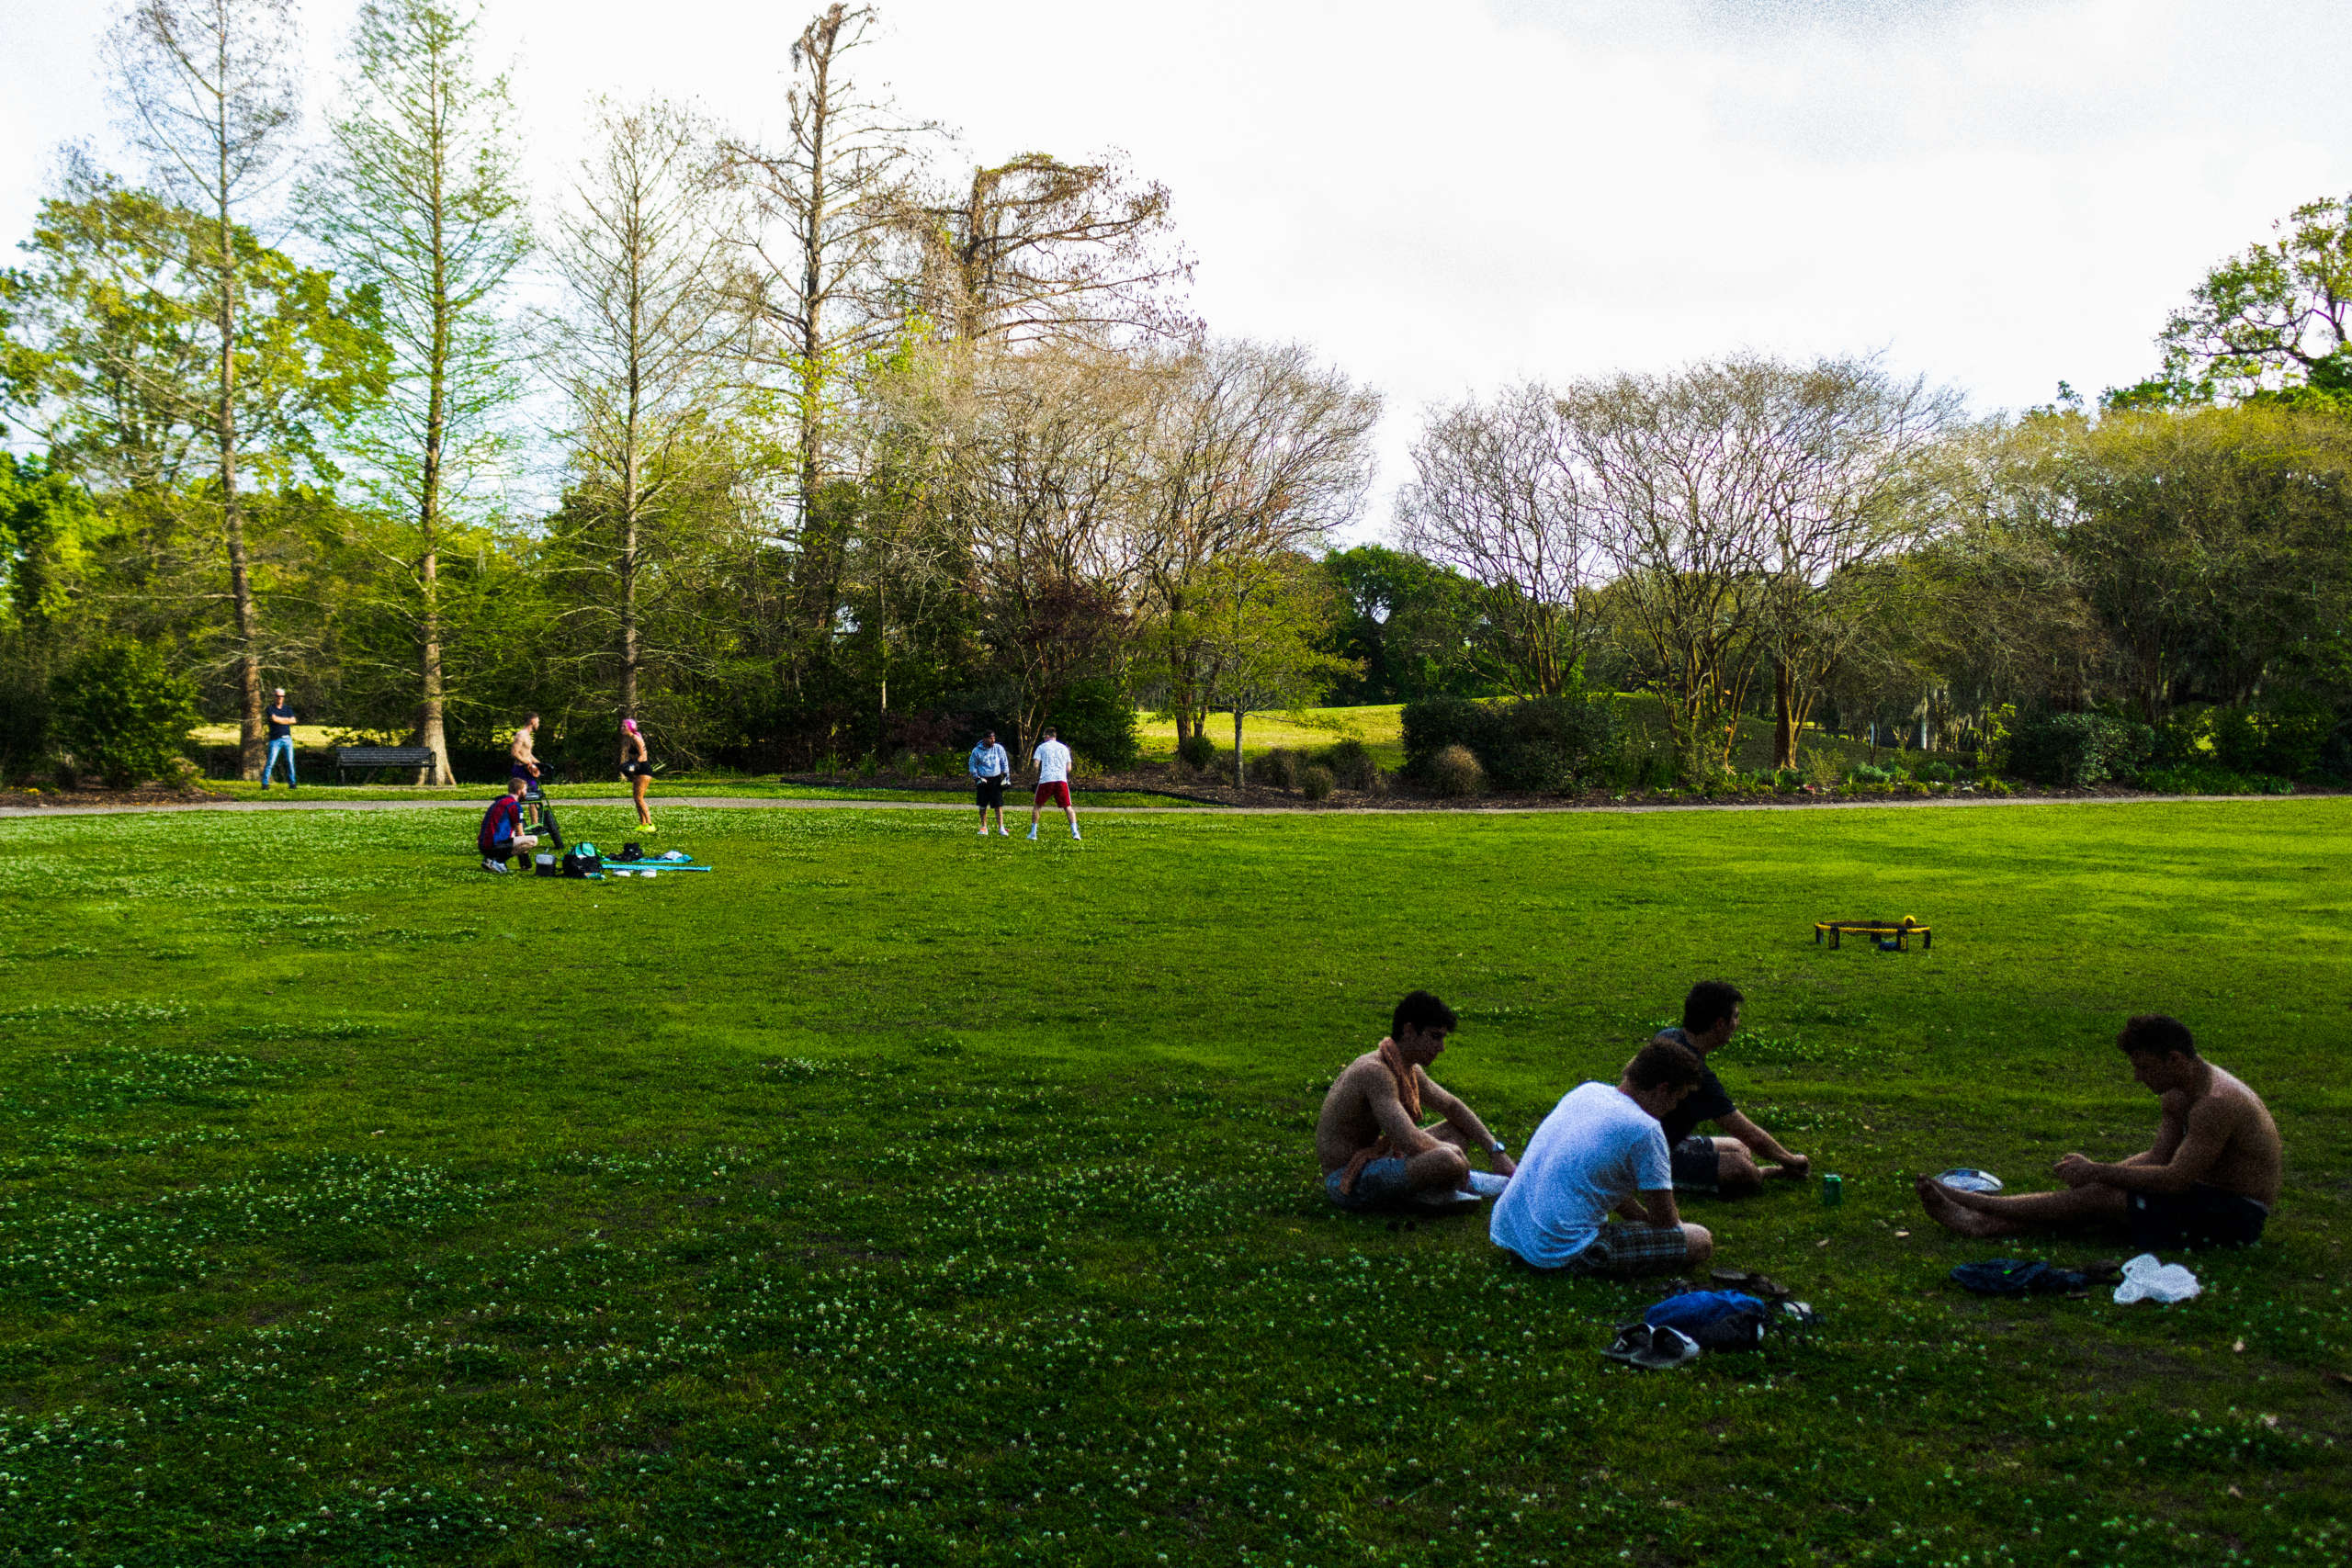 A group of people spending time in the park.